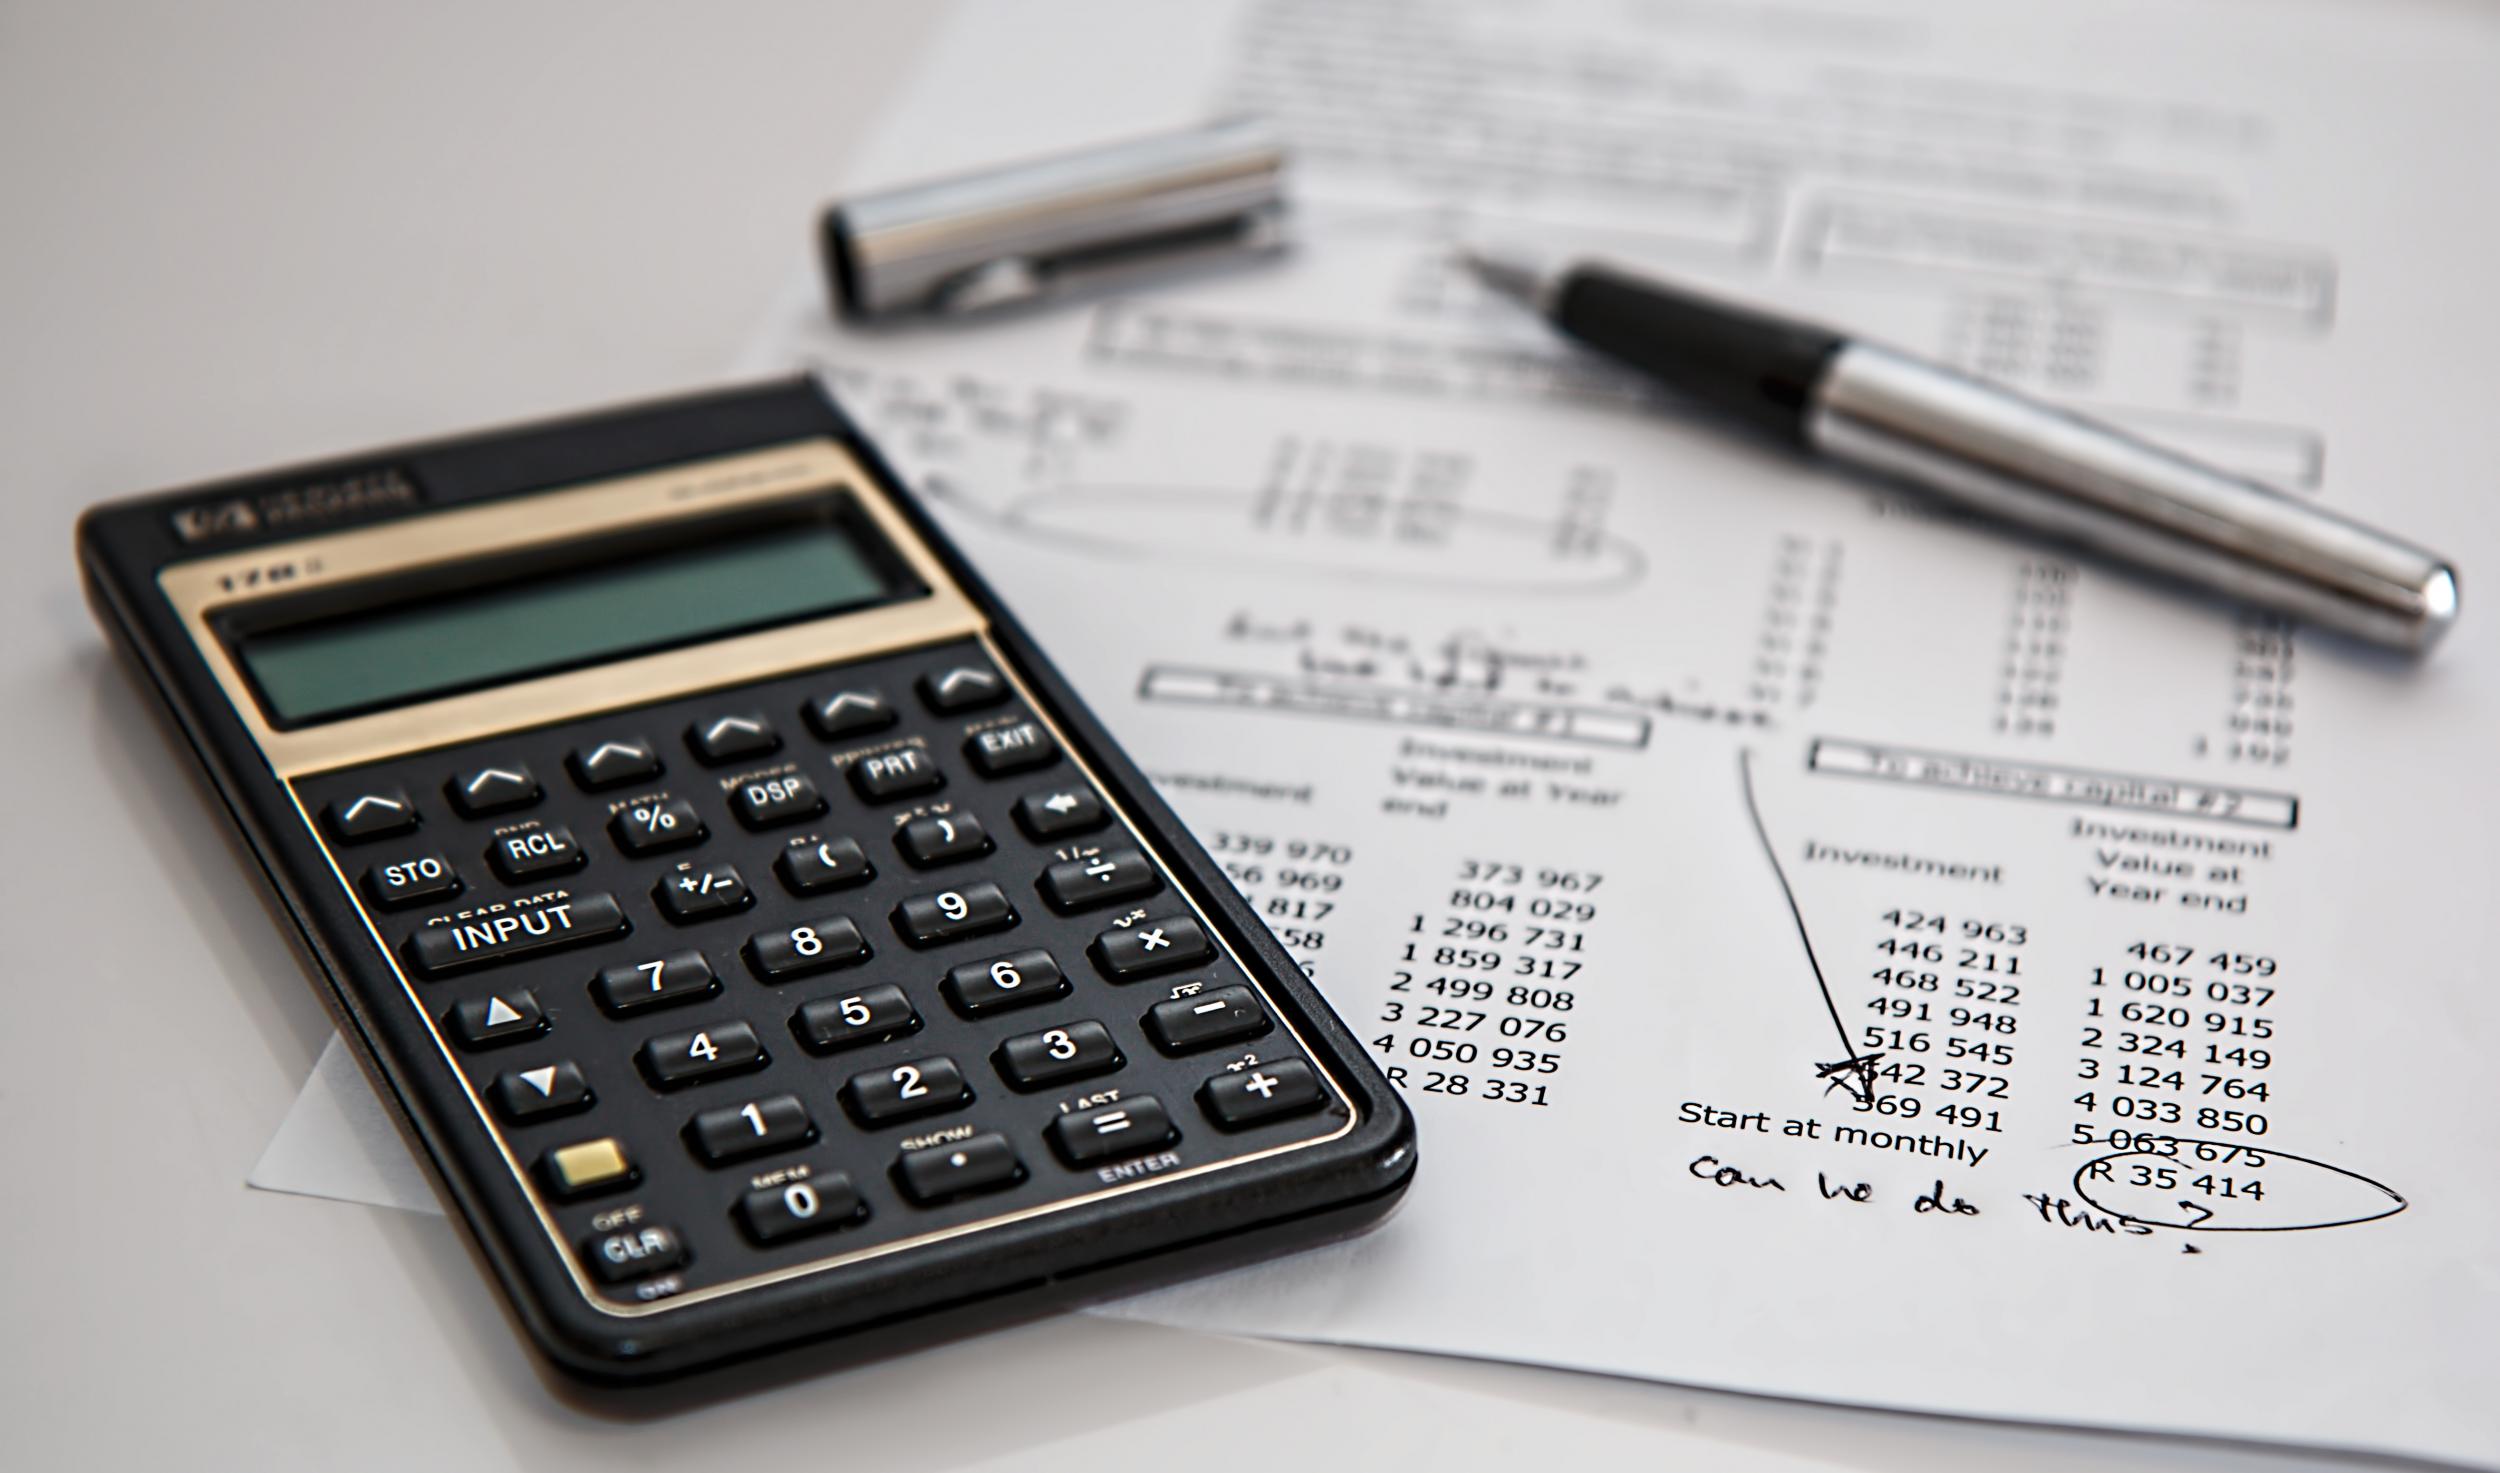 Hire The Best Accountants In Newnan, GA To Keep Your Finances In Order